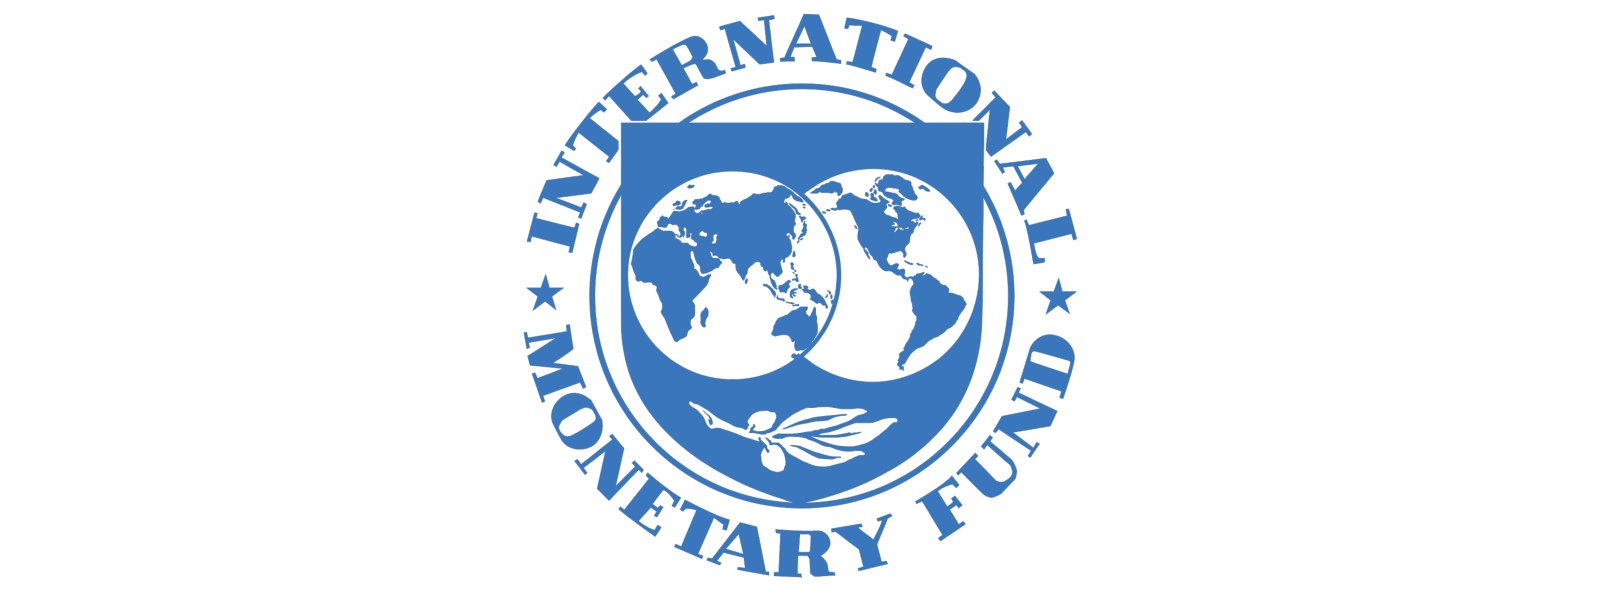 IMF reaches agreement with Argentina, frees up $4.03 bln